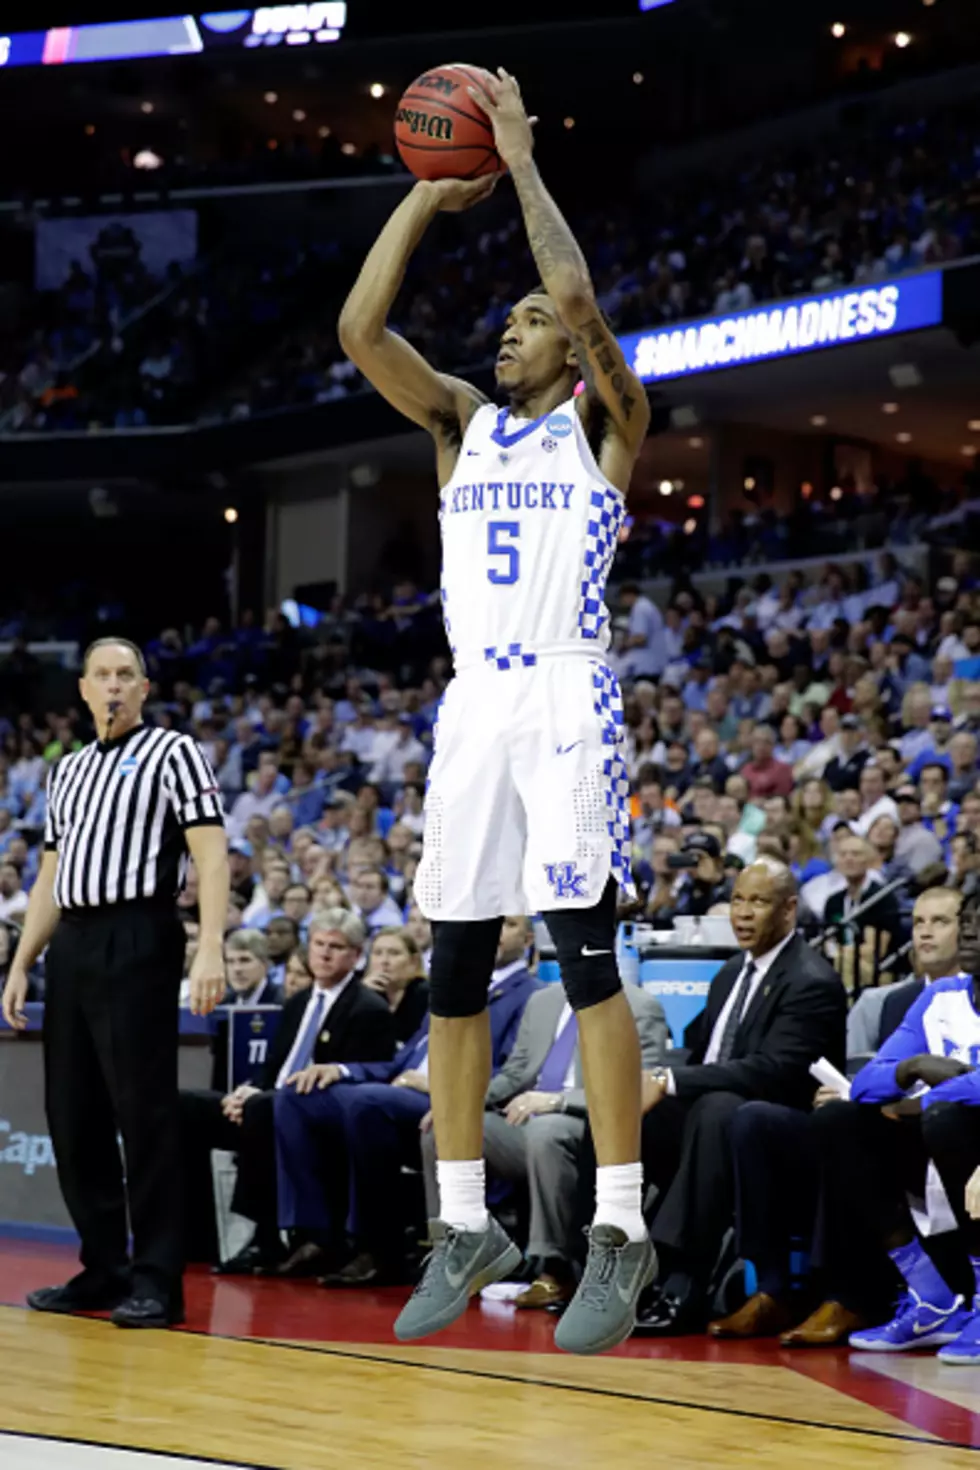 Pelton: Malik Monk Clearly Is the Best Fit for the Sixers